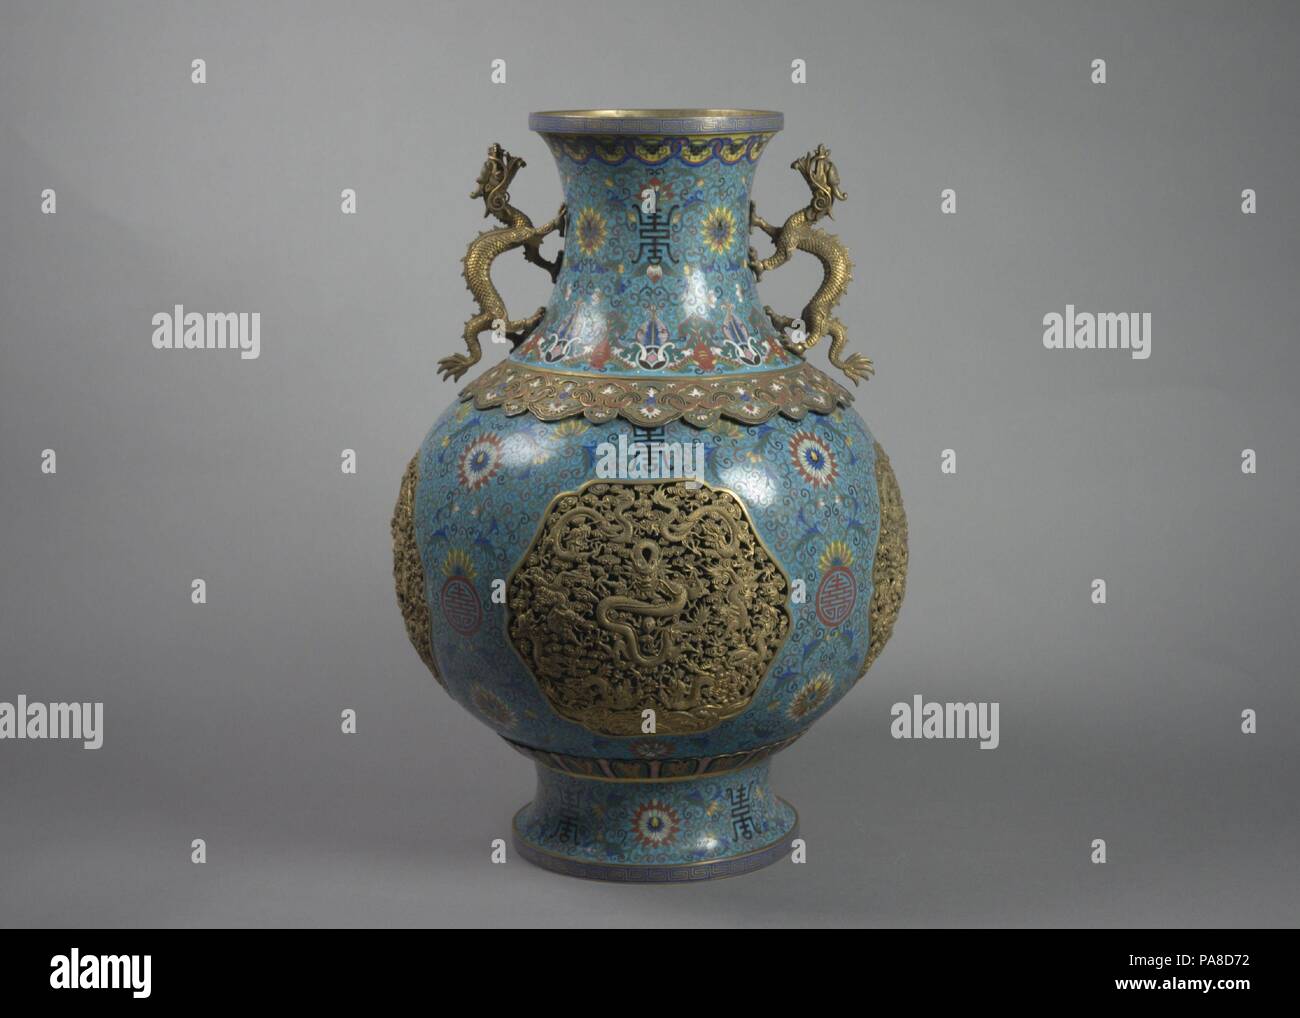 One of a Pair of Vases with Dragon Handles. Culture: China. Dimensions: H. 18 1/2 in. (47 cm); Diam. 13 in. (33 cm); Diam. of rim 6 1/4 in. (15.9 cm); Diam. of foot 7 3/8 in. (18.7 cm). Date: 19th century.  Cloisonné is a technique for creating designs on metal whereby enclosures made from copper or bronze wire that has been bent or hammered into a desired pattern are filled with colored glass paste. Known as cloisons (French for 'partitions'), the enclosures are generally pasted or soldered onto the metal body. The glass paste, or enamel, is colored with metallic oxide and painted into the co Stock Photo